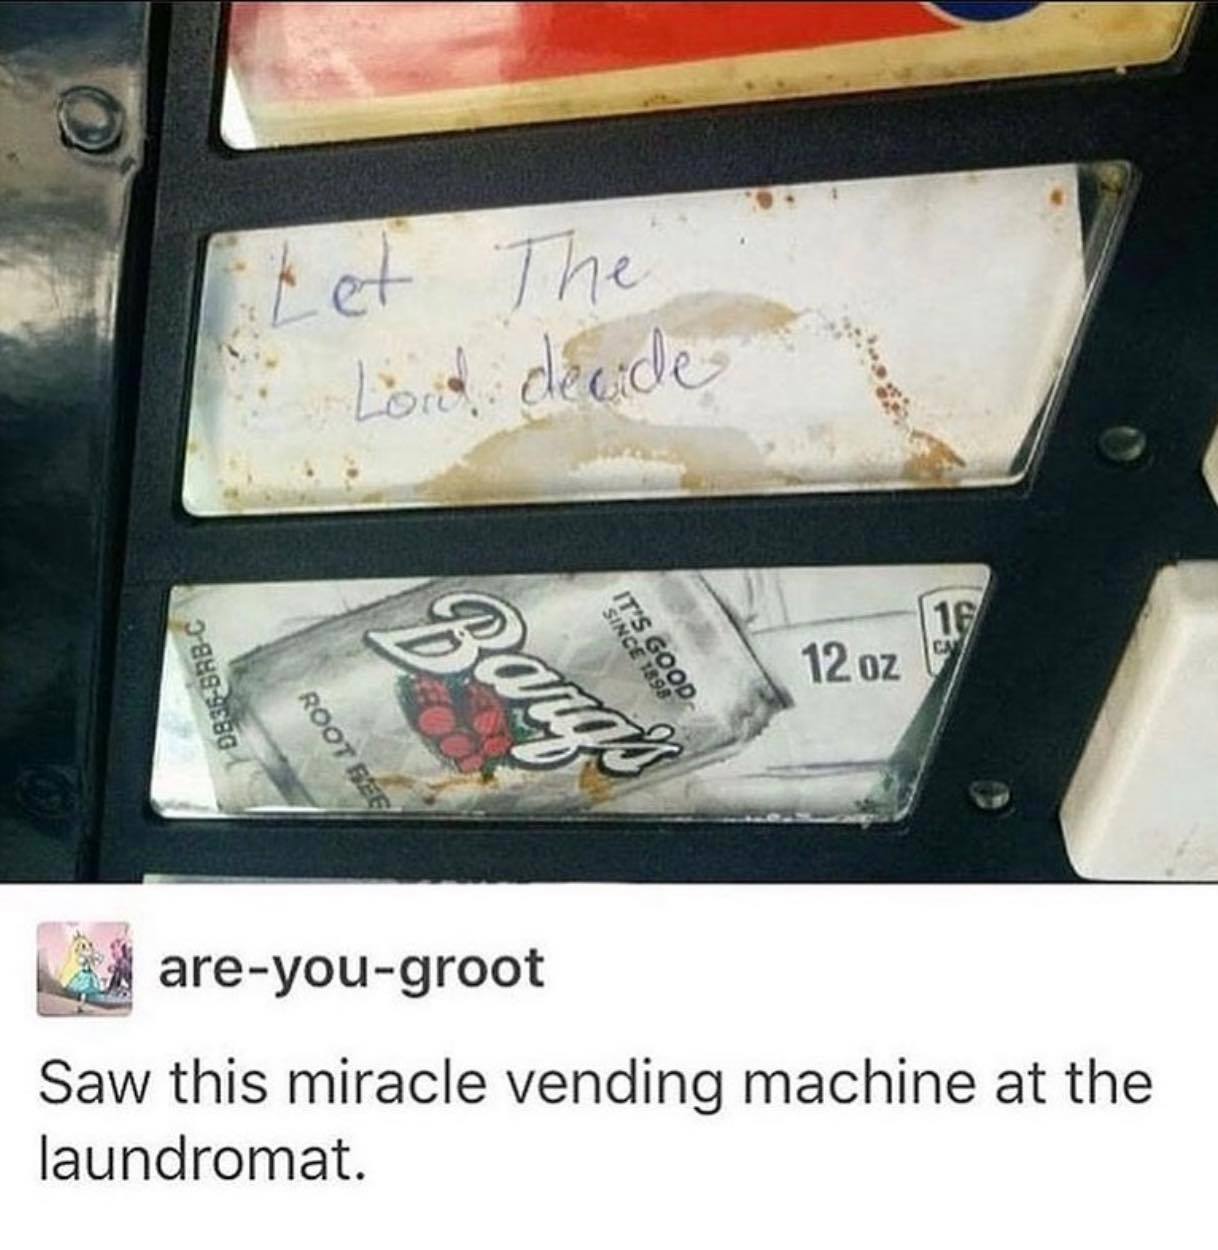 religion memes - laundromat meme - Eet The Lord decide 16 1201 Cal Since 1898 It'S Good StorieSbbC Root Bee areyougroot Saw this miracle vending machine at the laundromat.